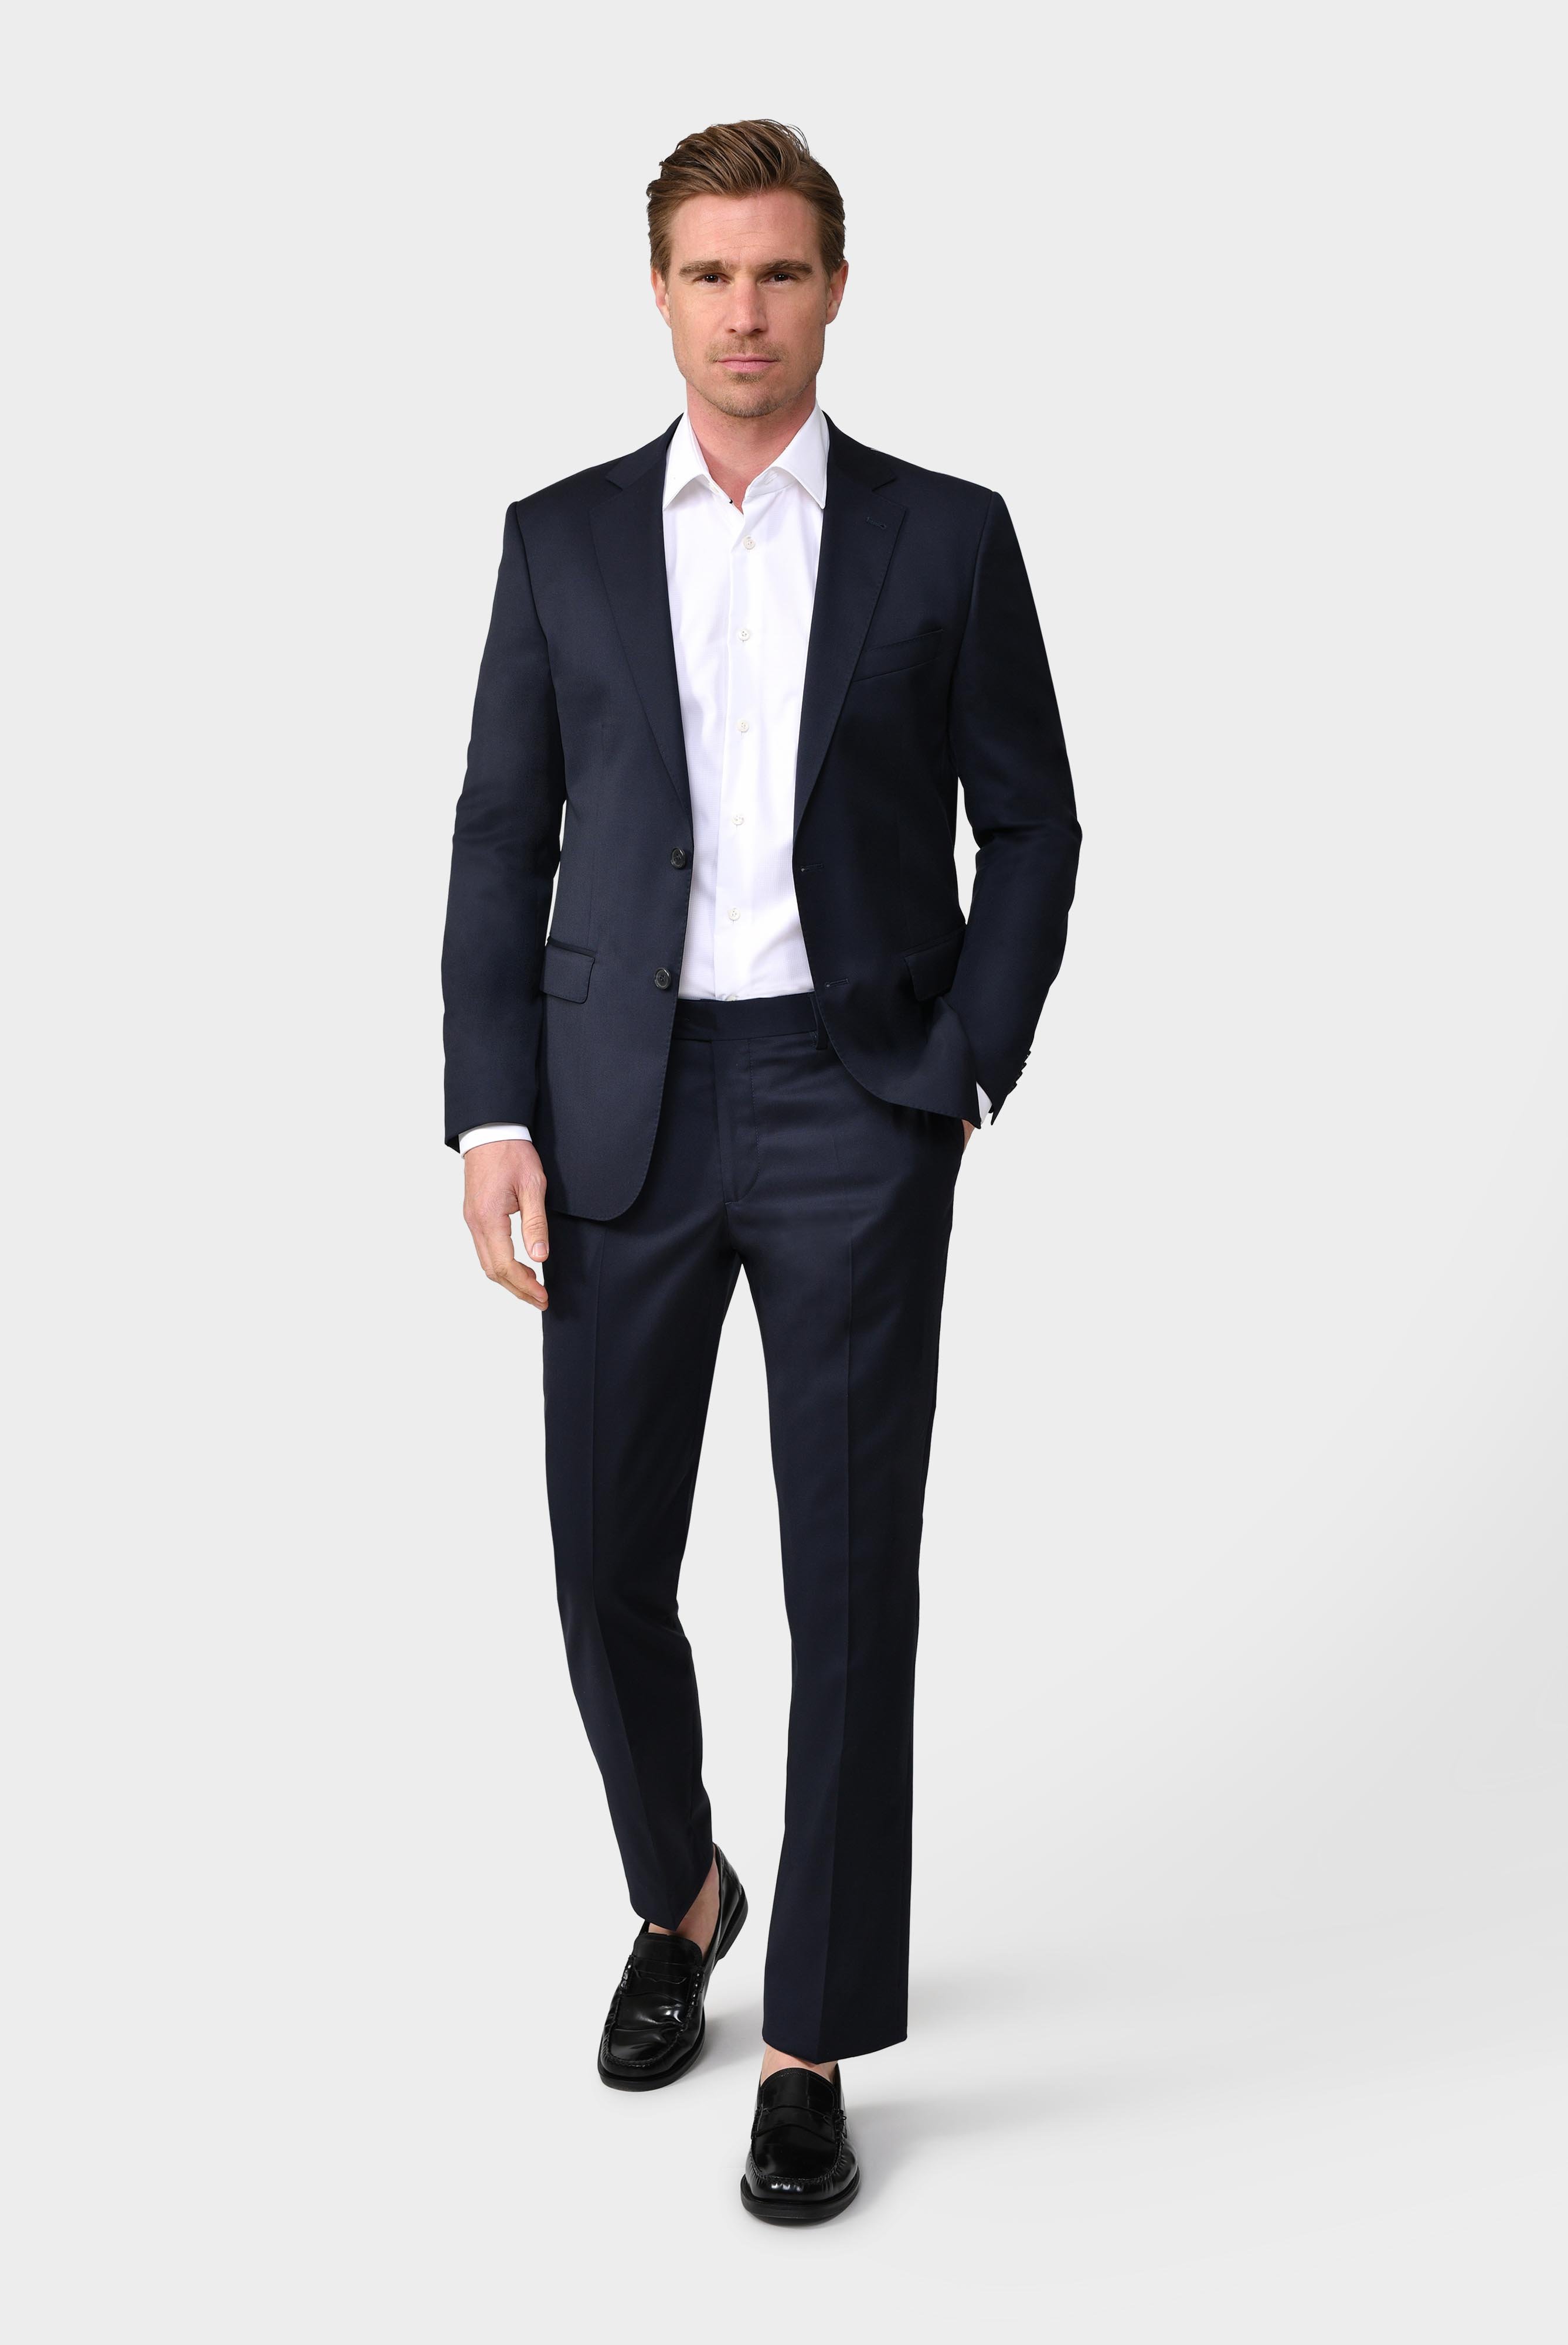 Jeans & Trousers+Men''s pants made of merino wool+80.7804.16.H01000.780.44